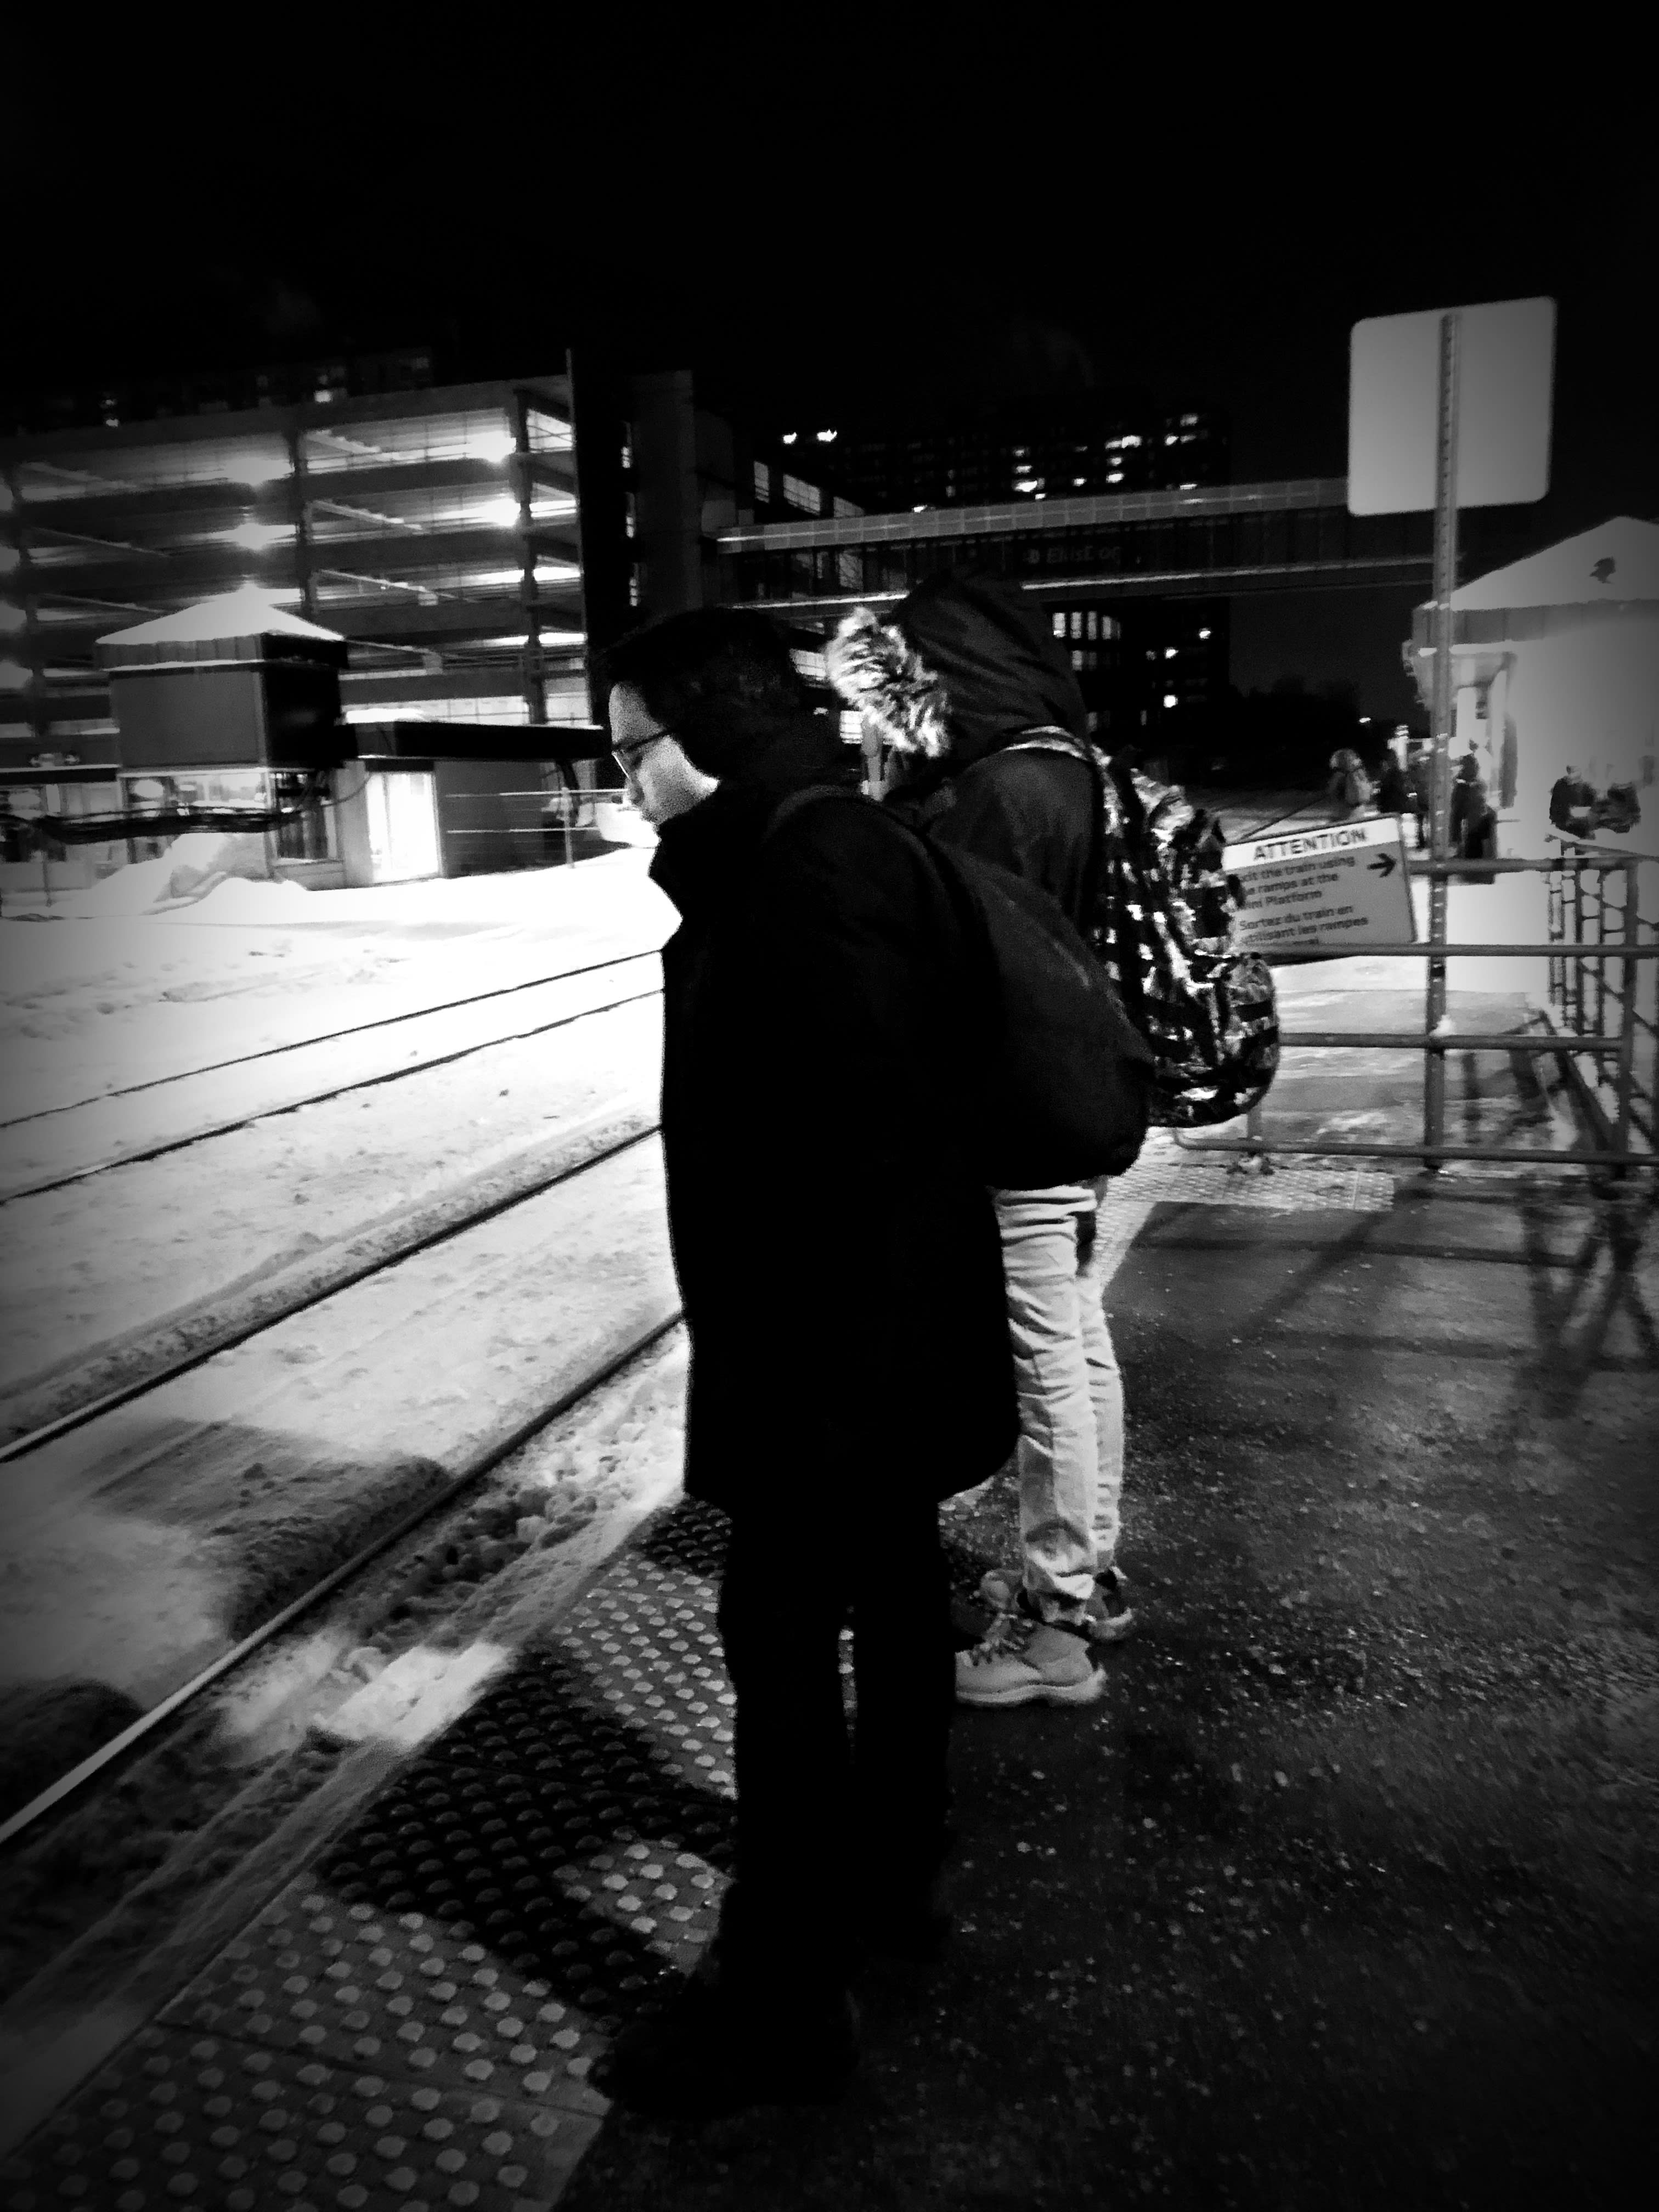 Two people stand in the cold while waiting for a train.